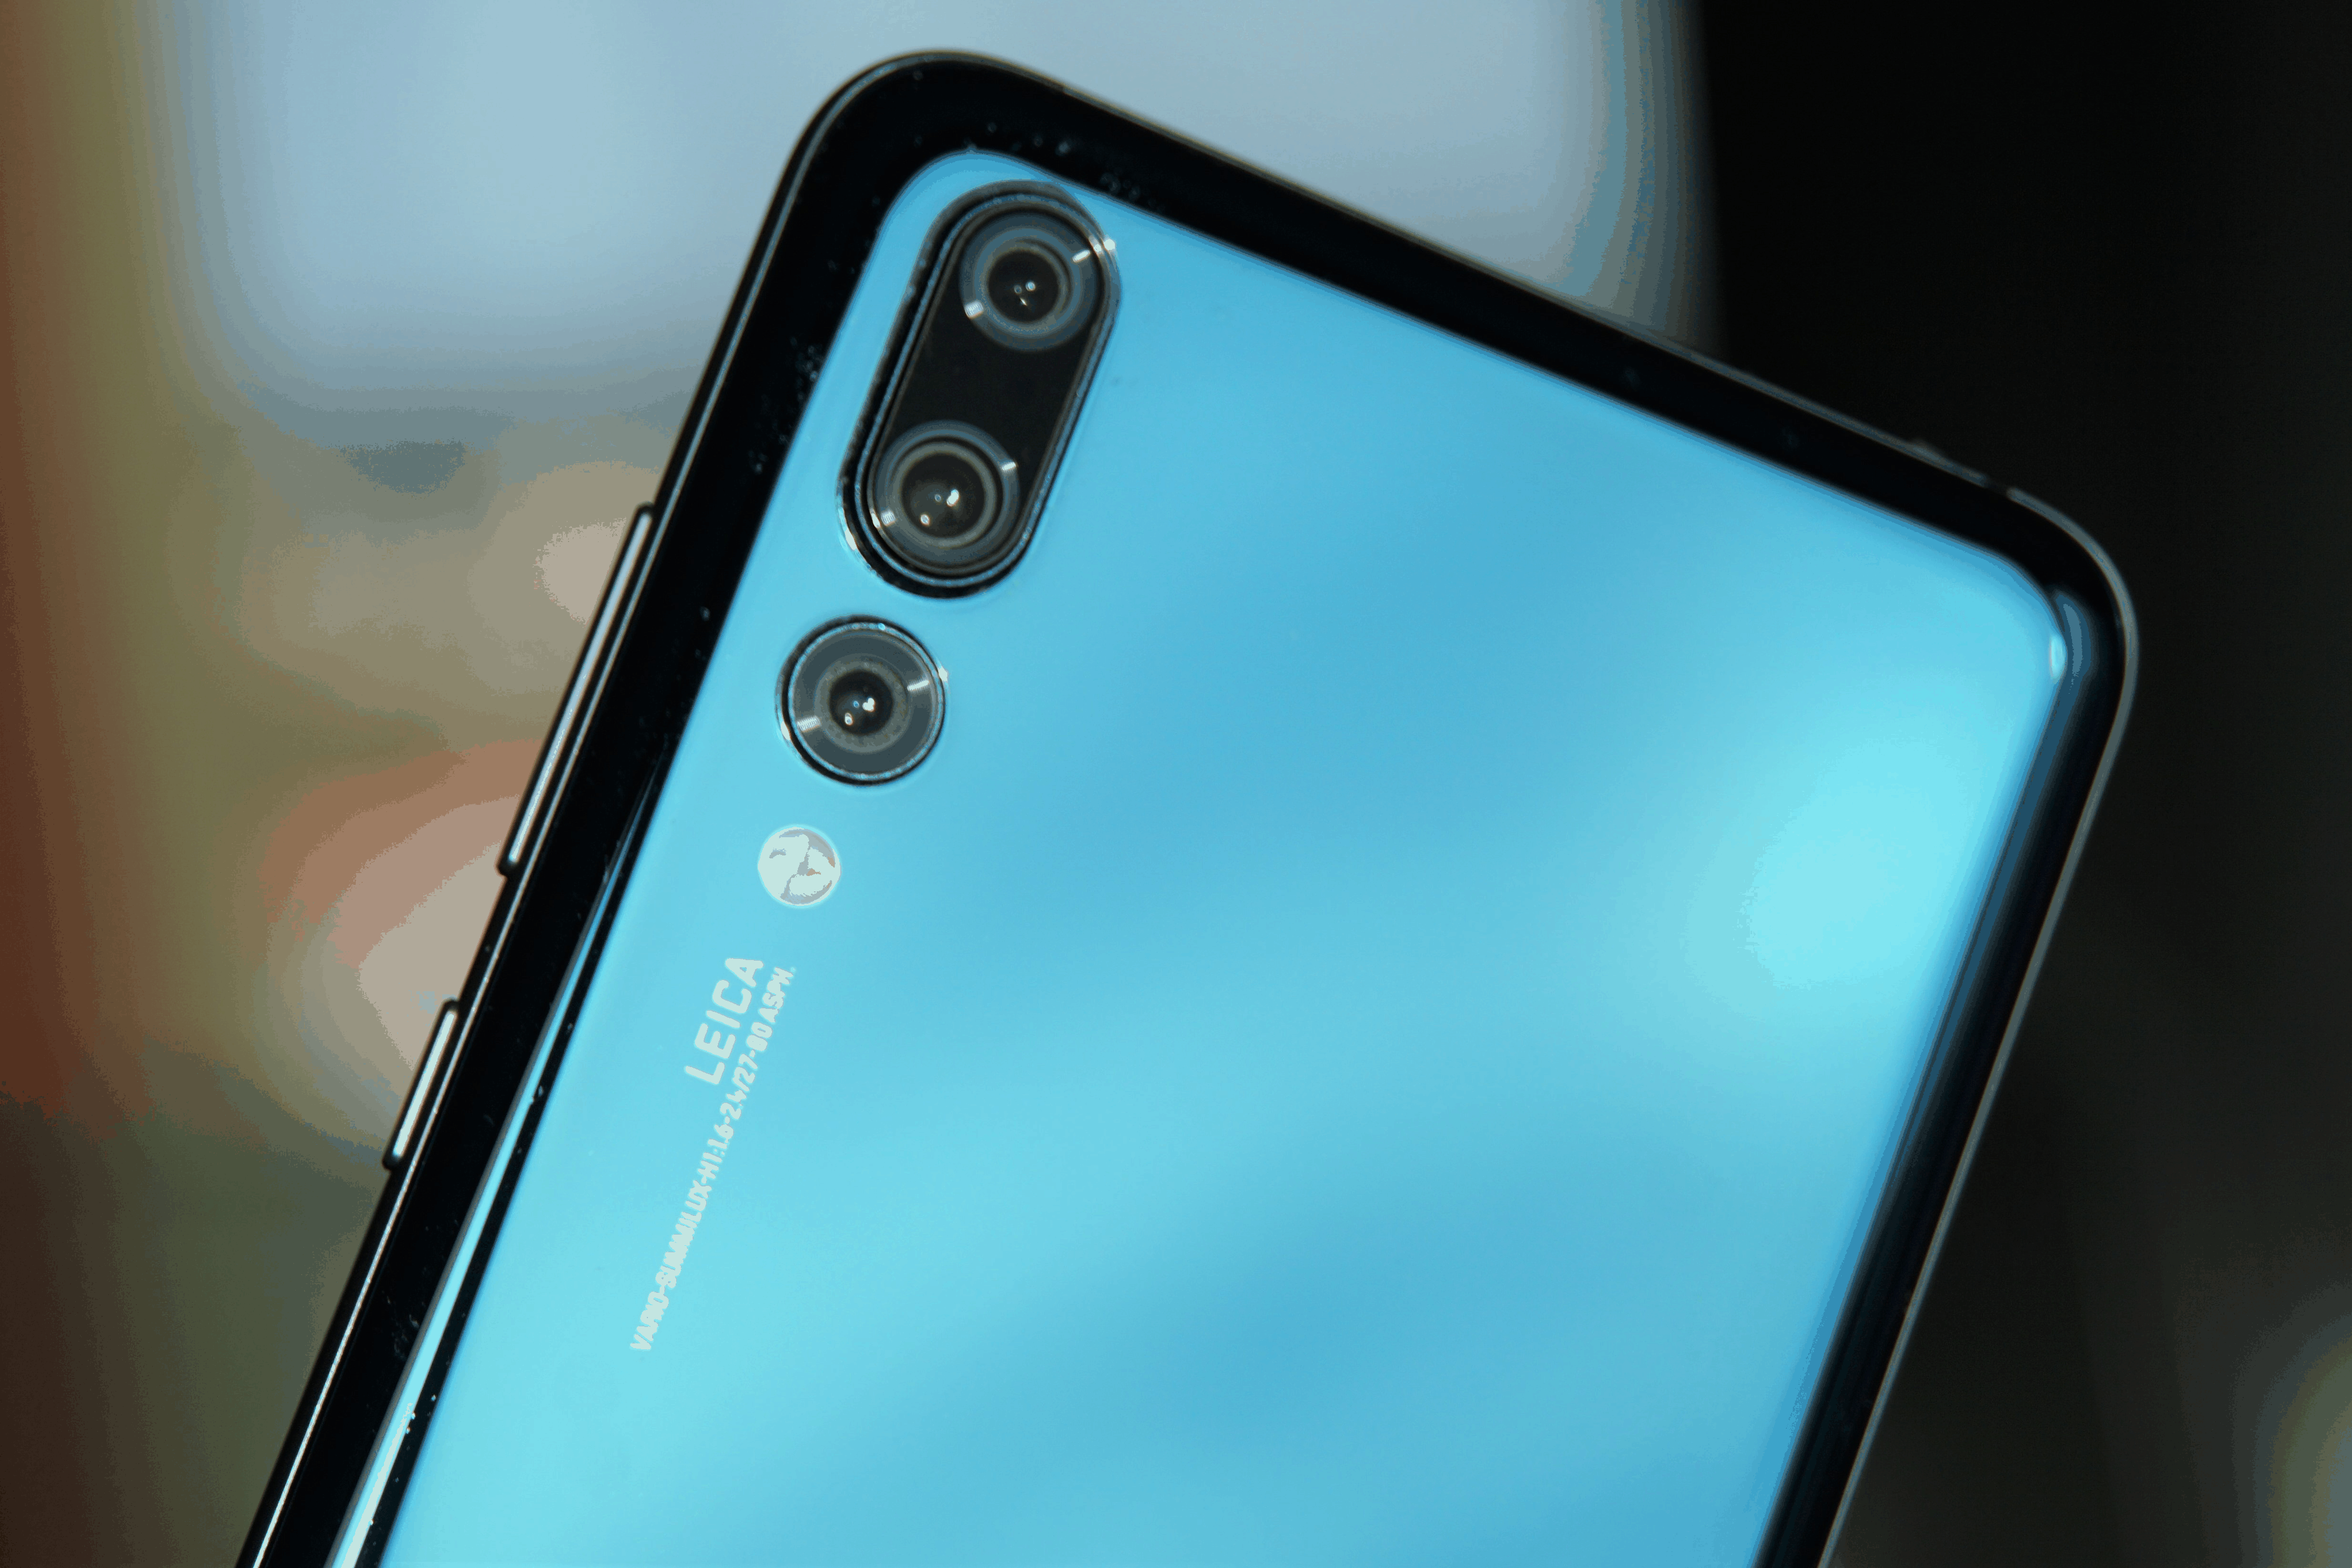 Huawei P20 Pro Android Smartphone Handy